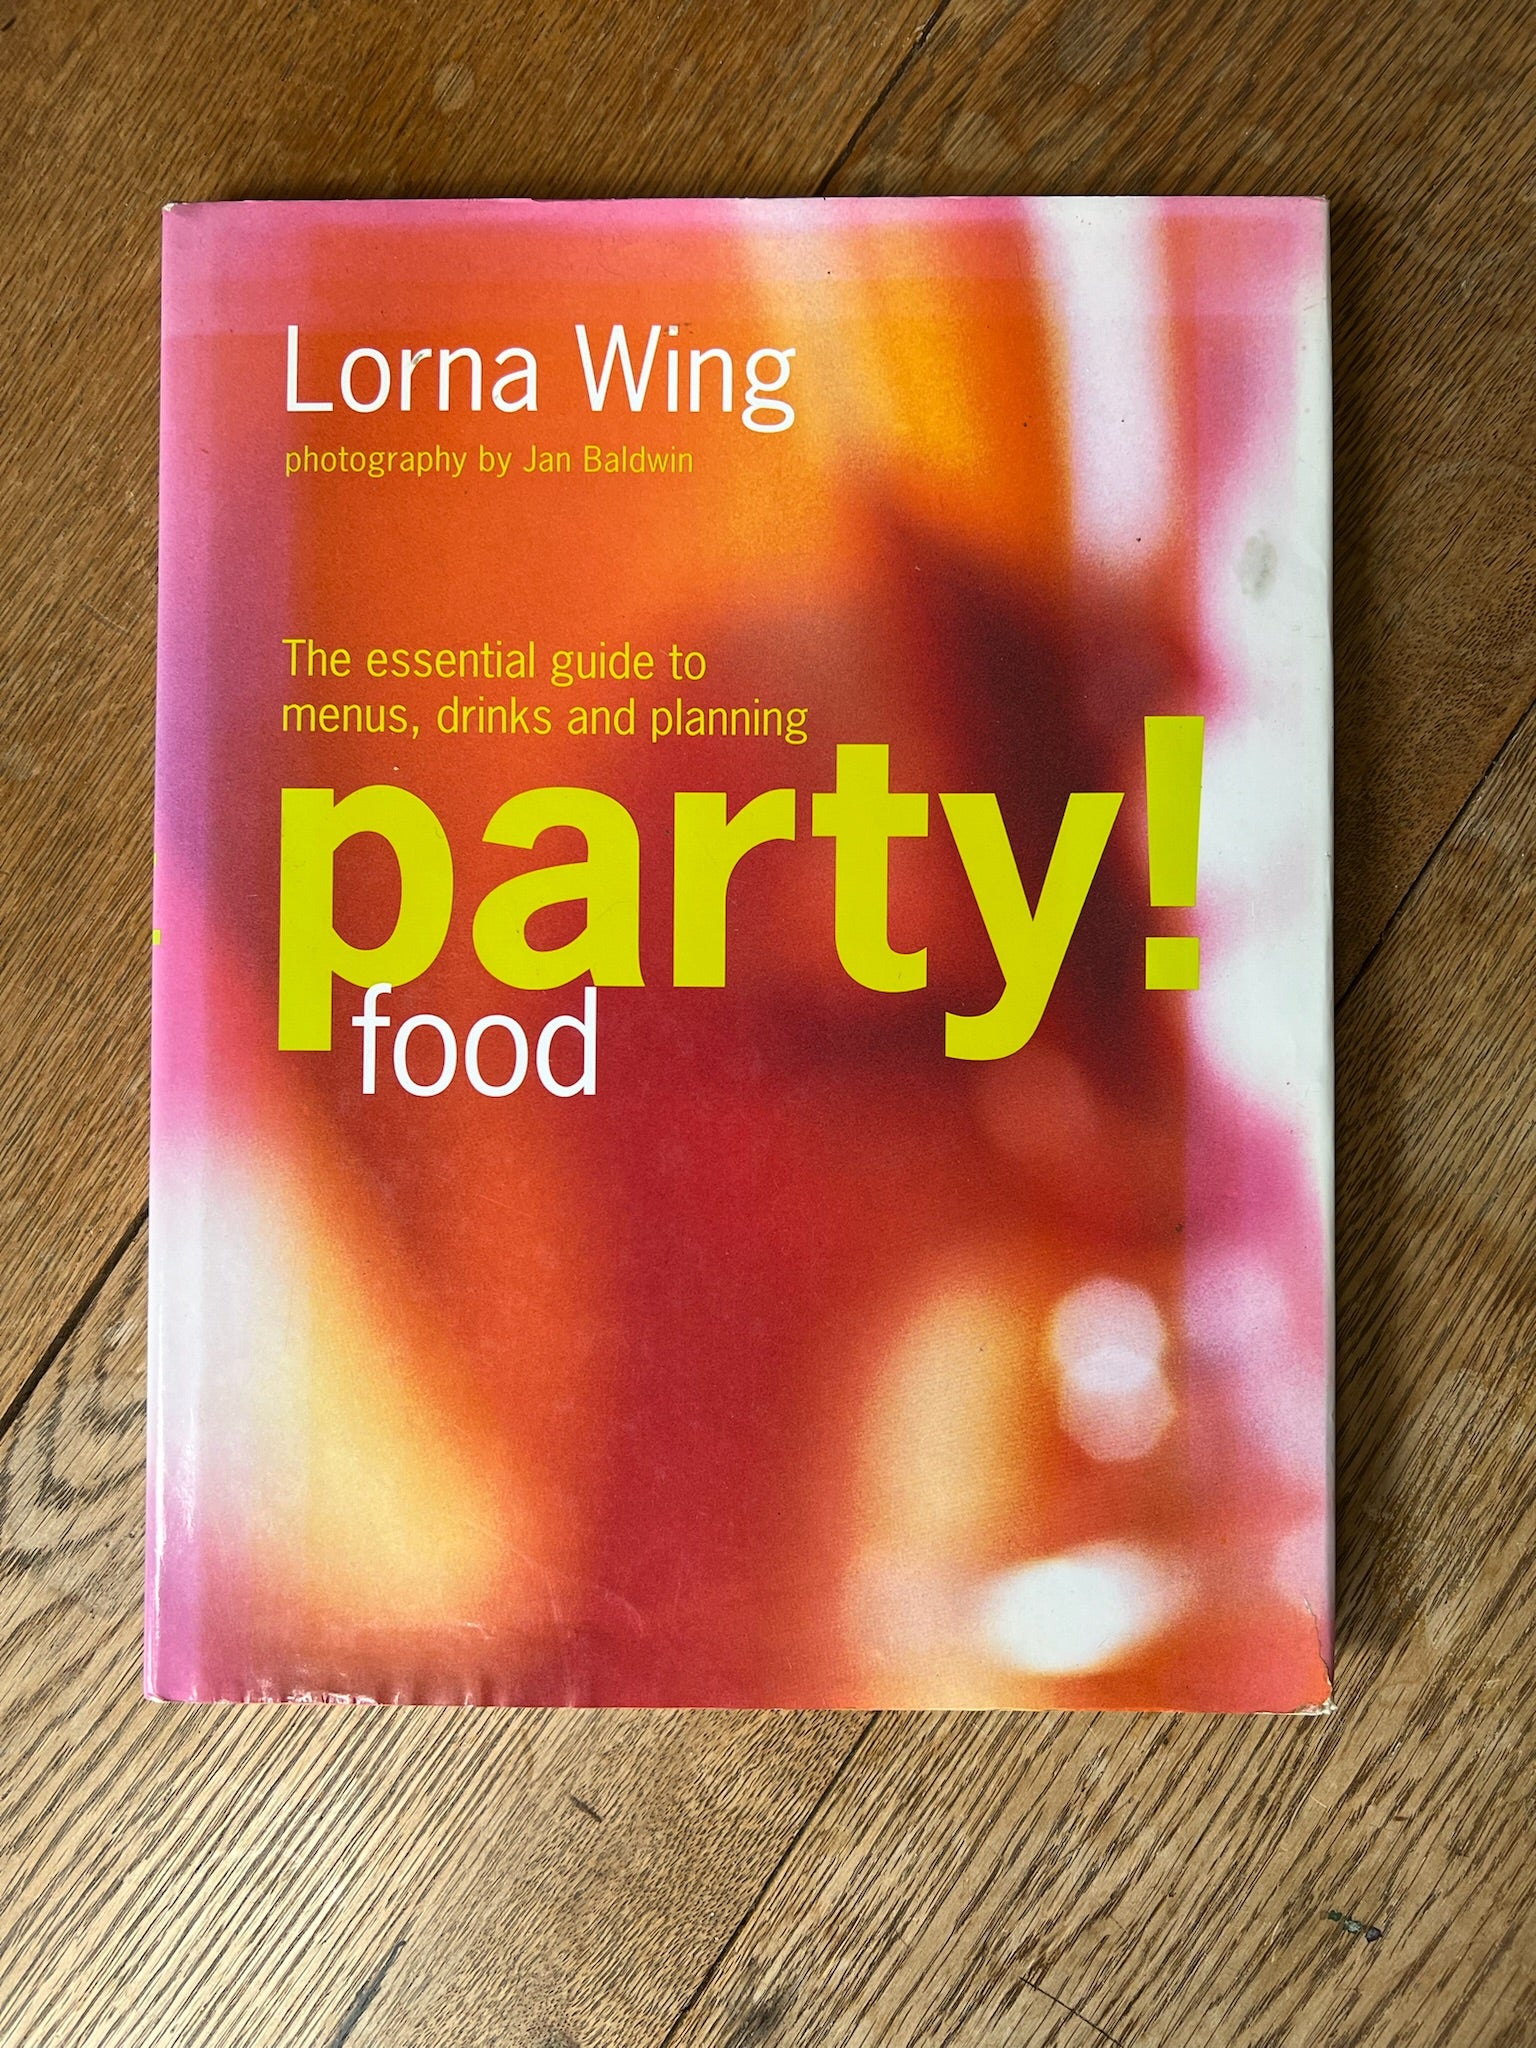 ‘PARTY FOOD’ Lorna Wing